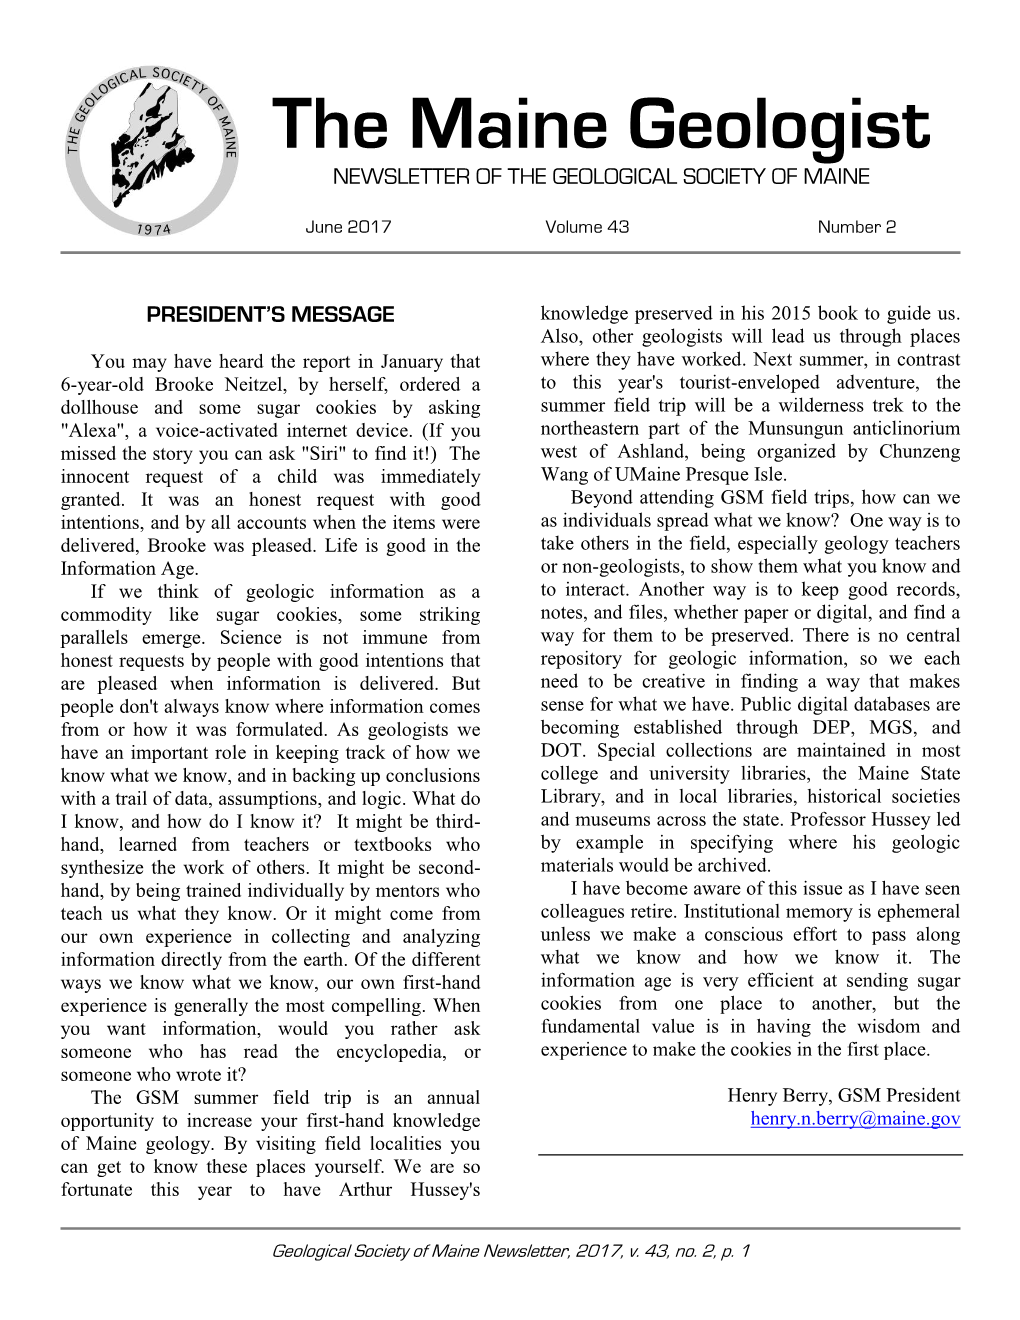 The Maine Geologist NEWSLETTER of the GEOLOGICAL SOCIETY of MAINE